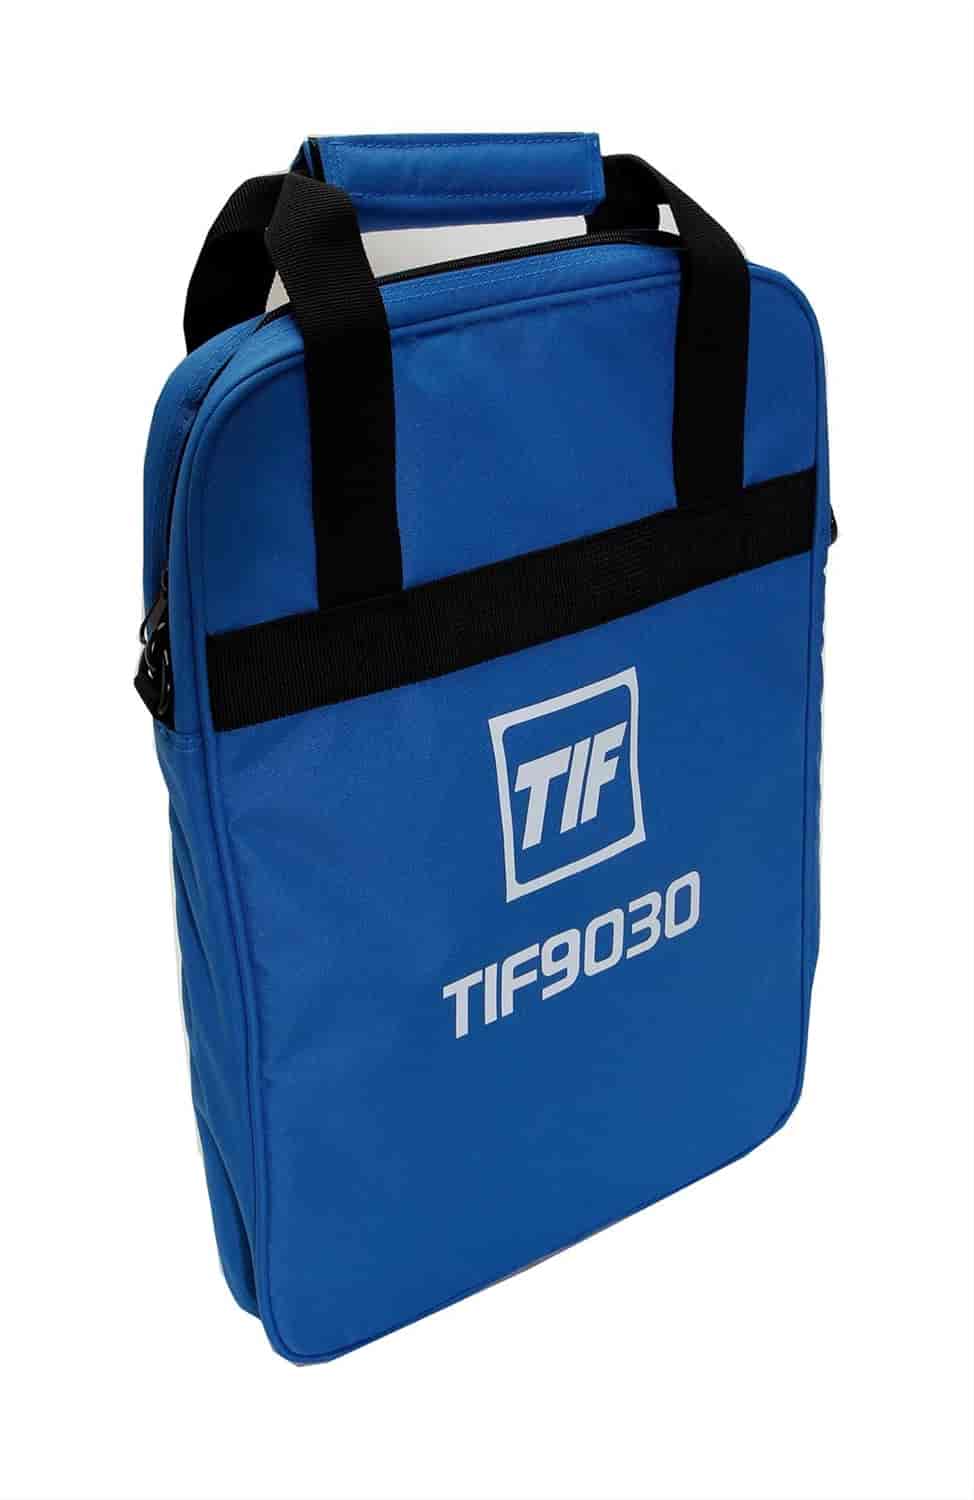 Soft Carrying Case For Tif9030